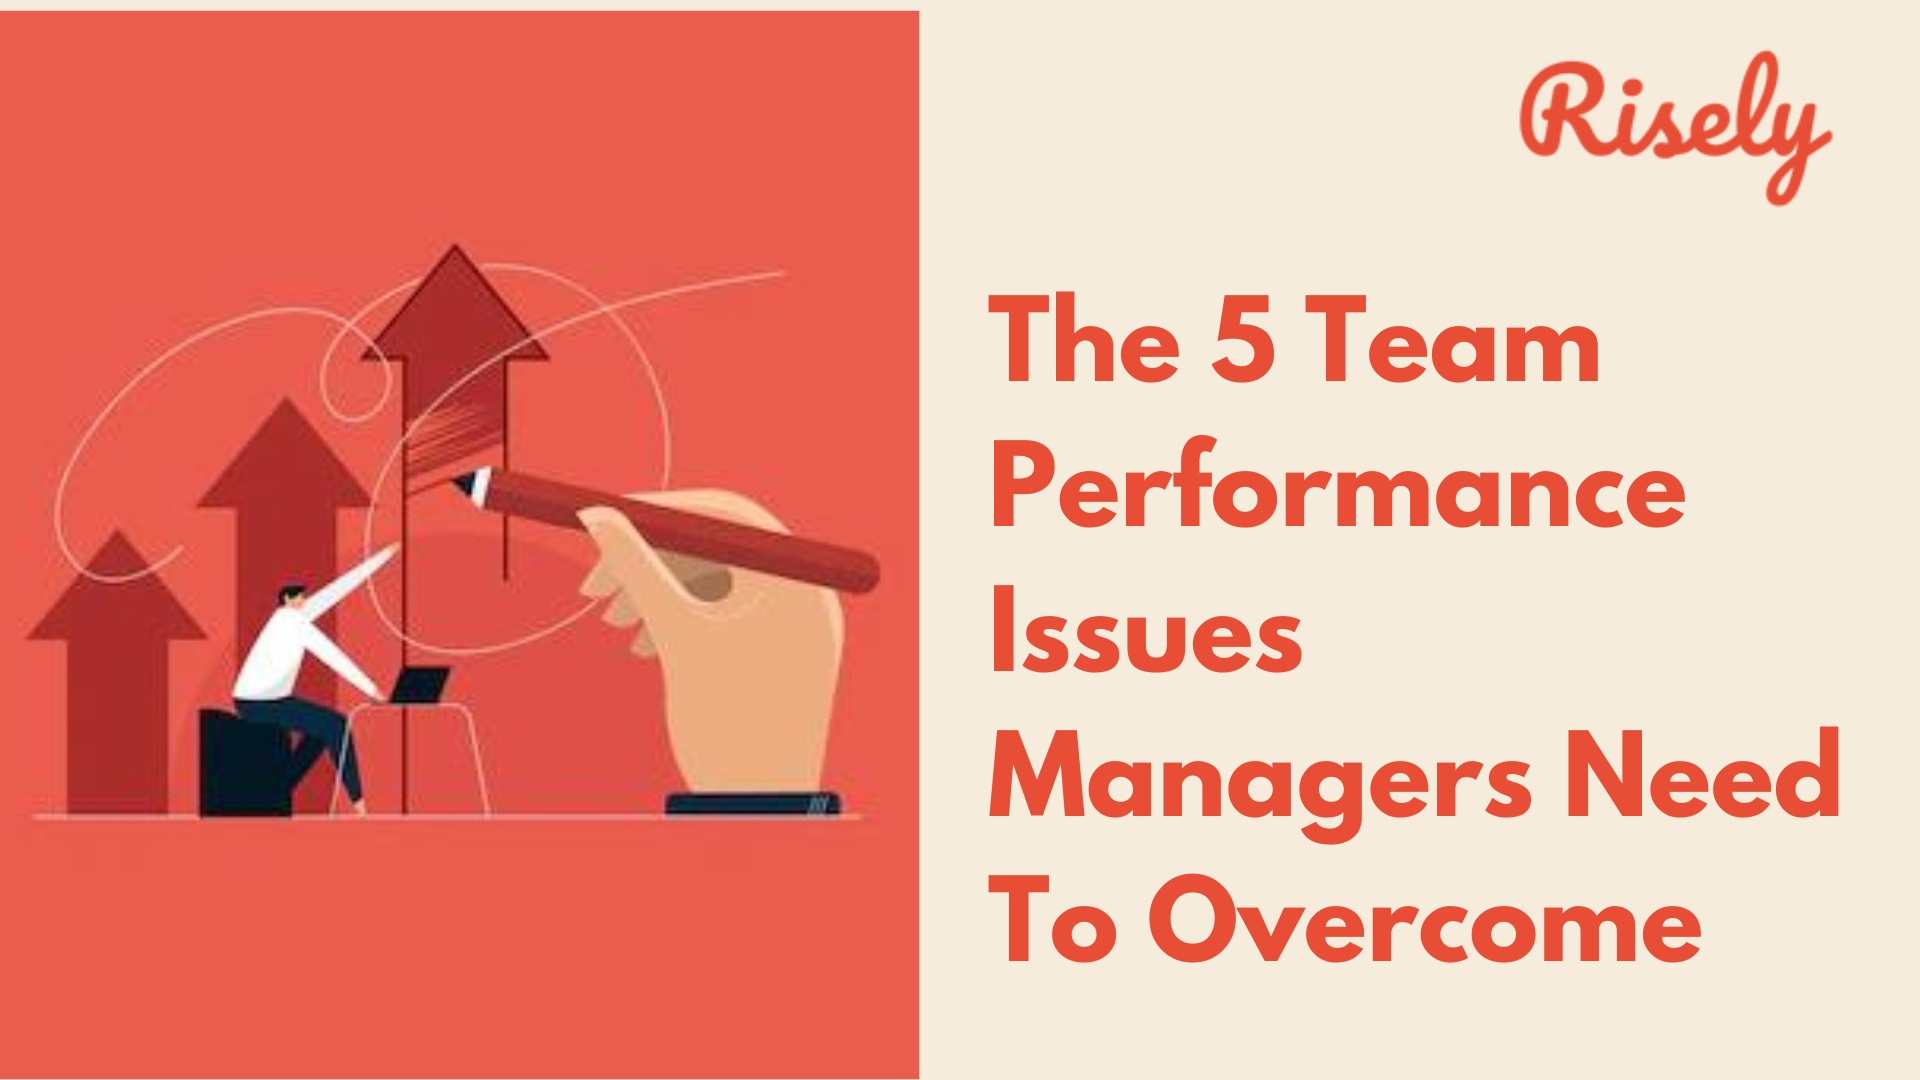 The 5 Team Performance Issues Managers Need To Overcome